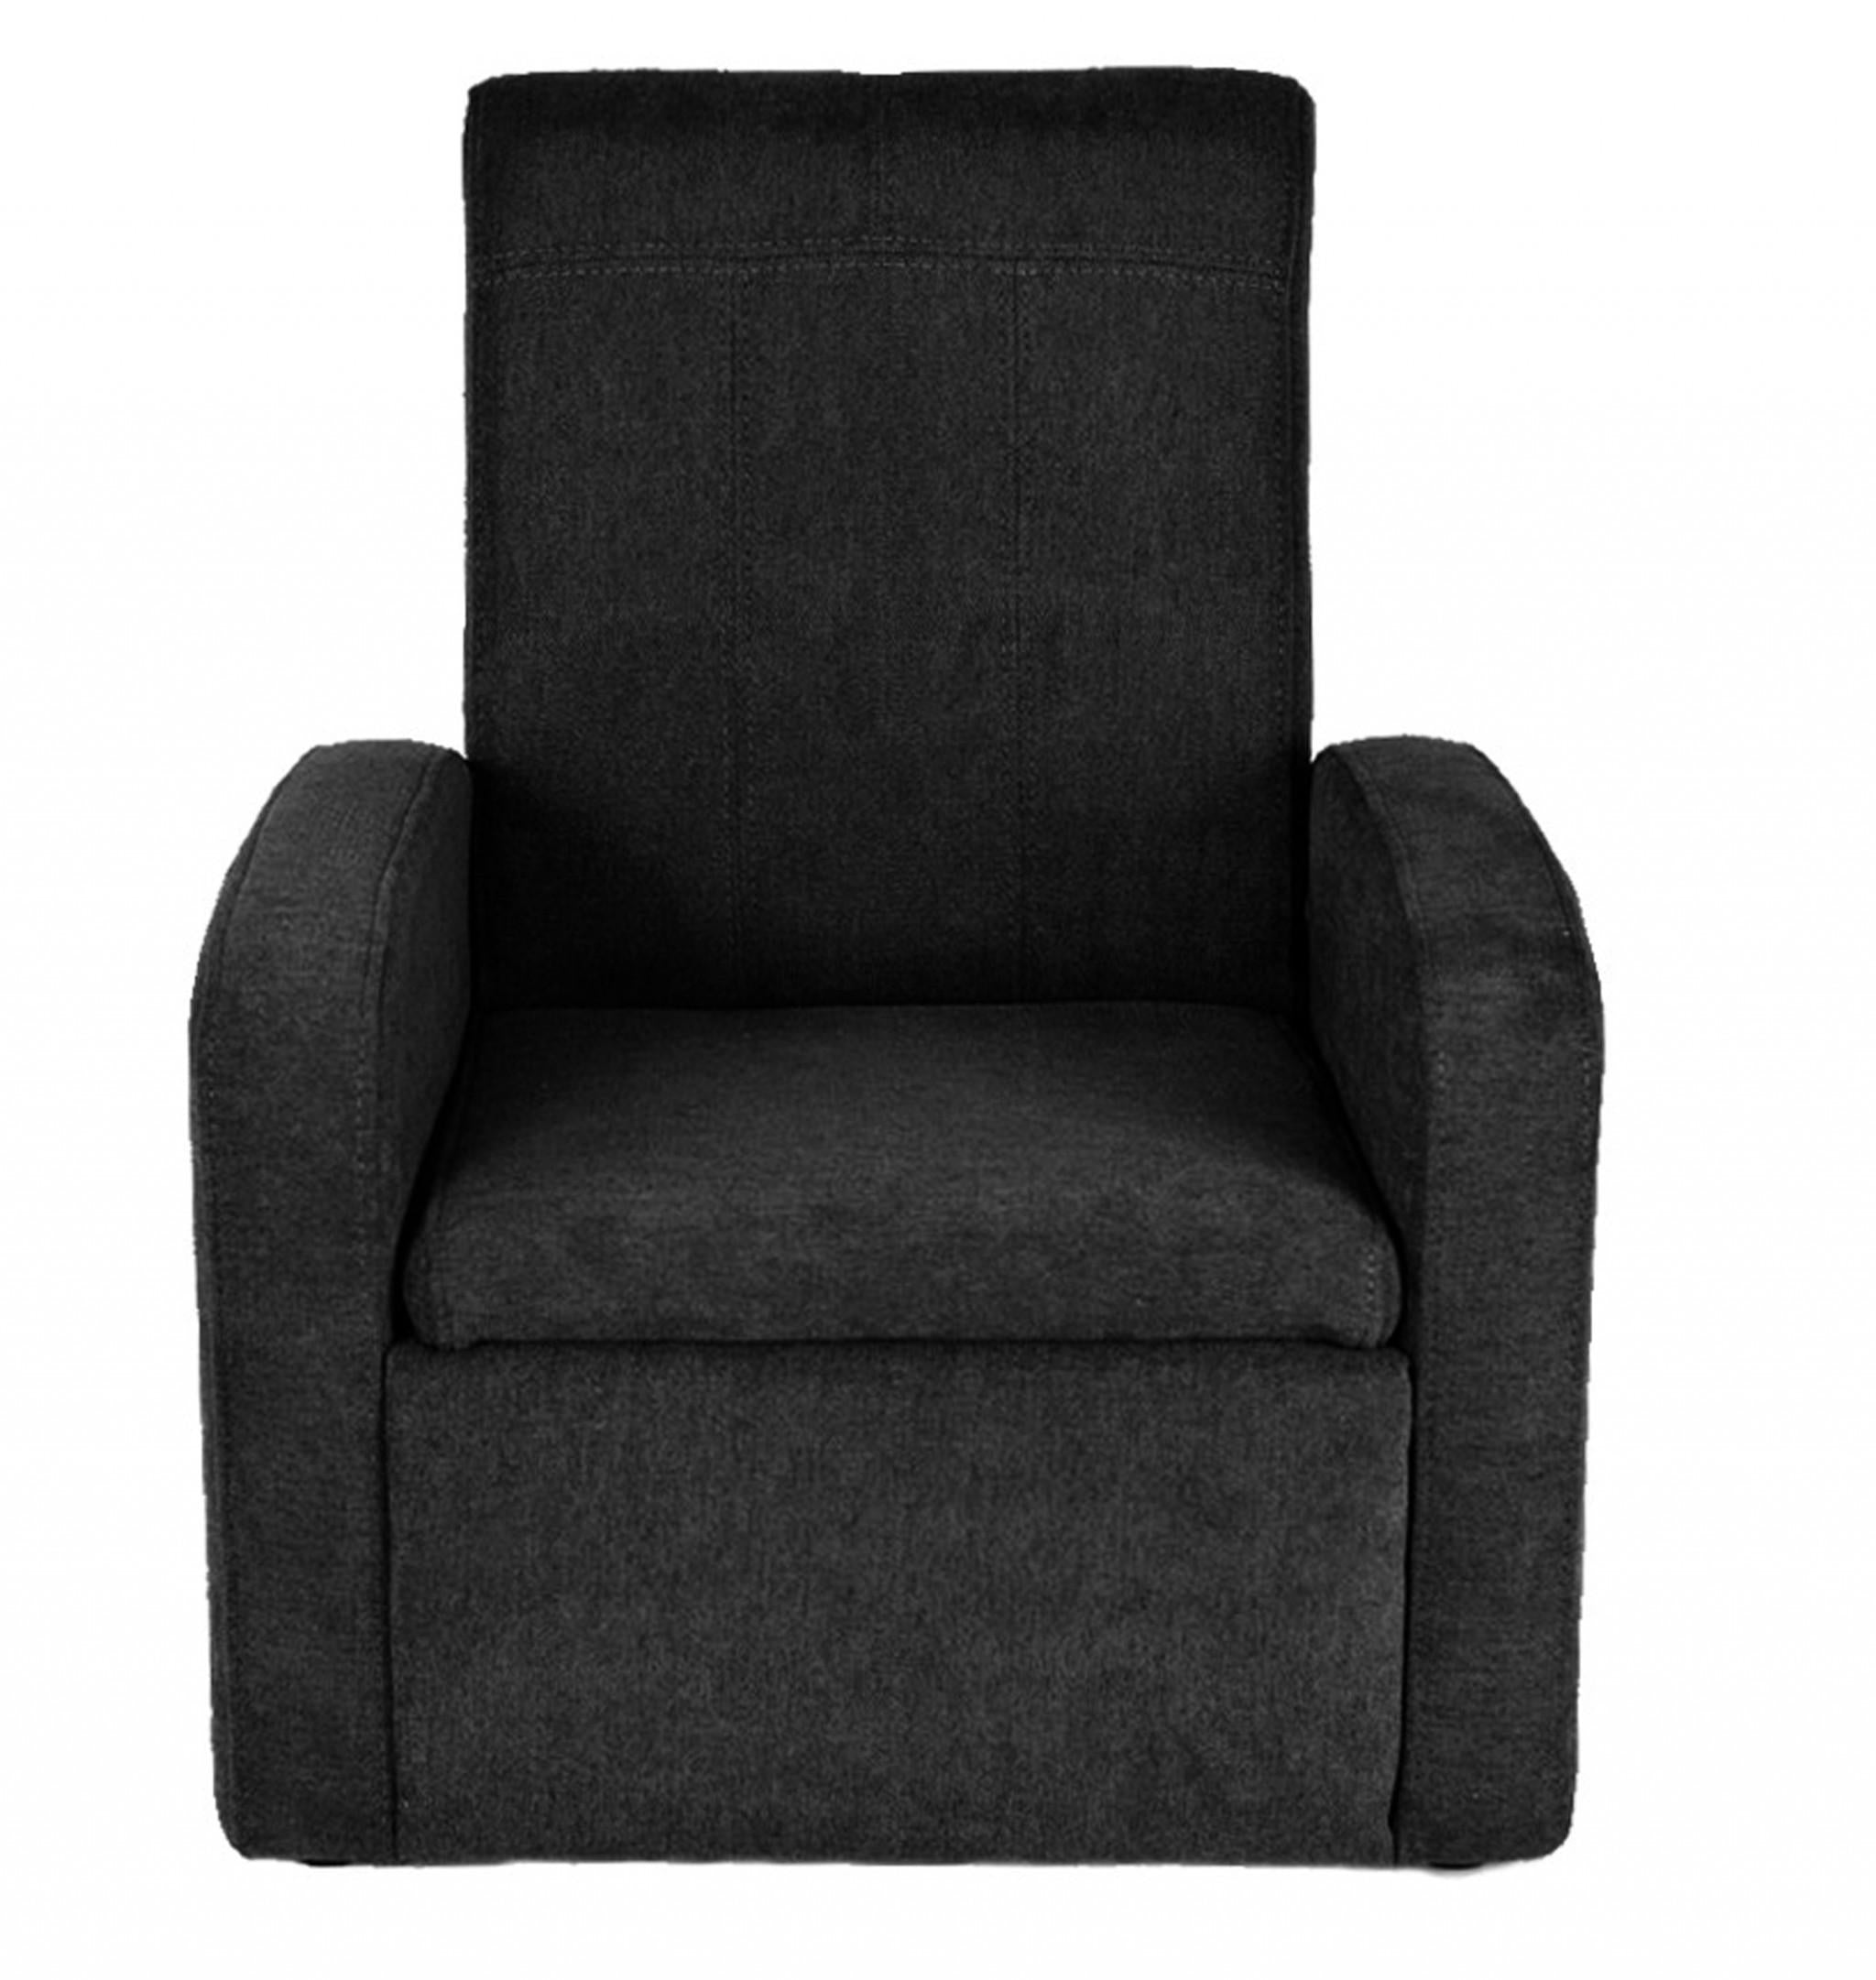 Kids Black Comfy Upholstered Recliner Chair with Storage Default Title